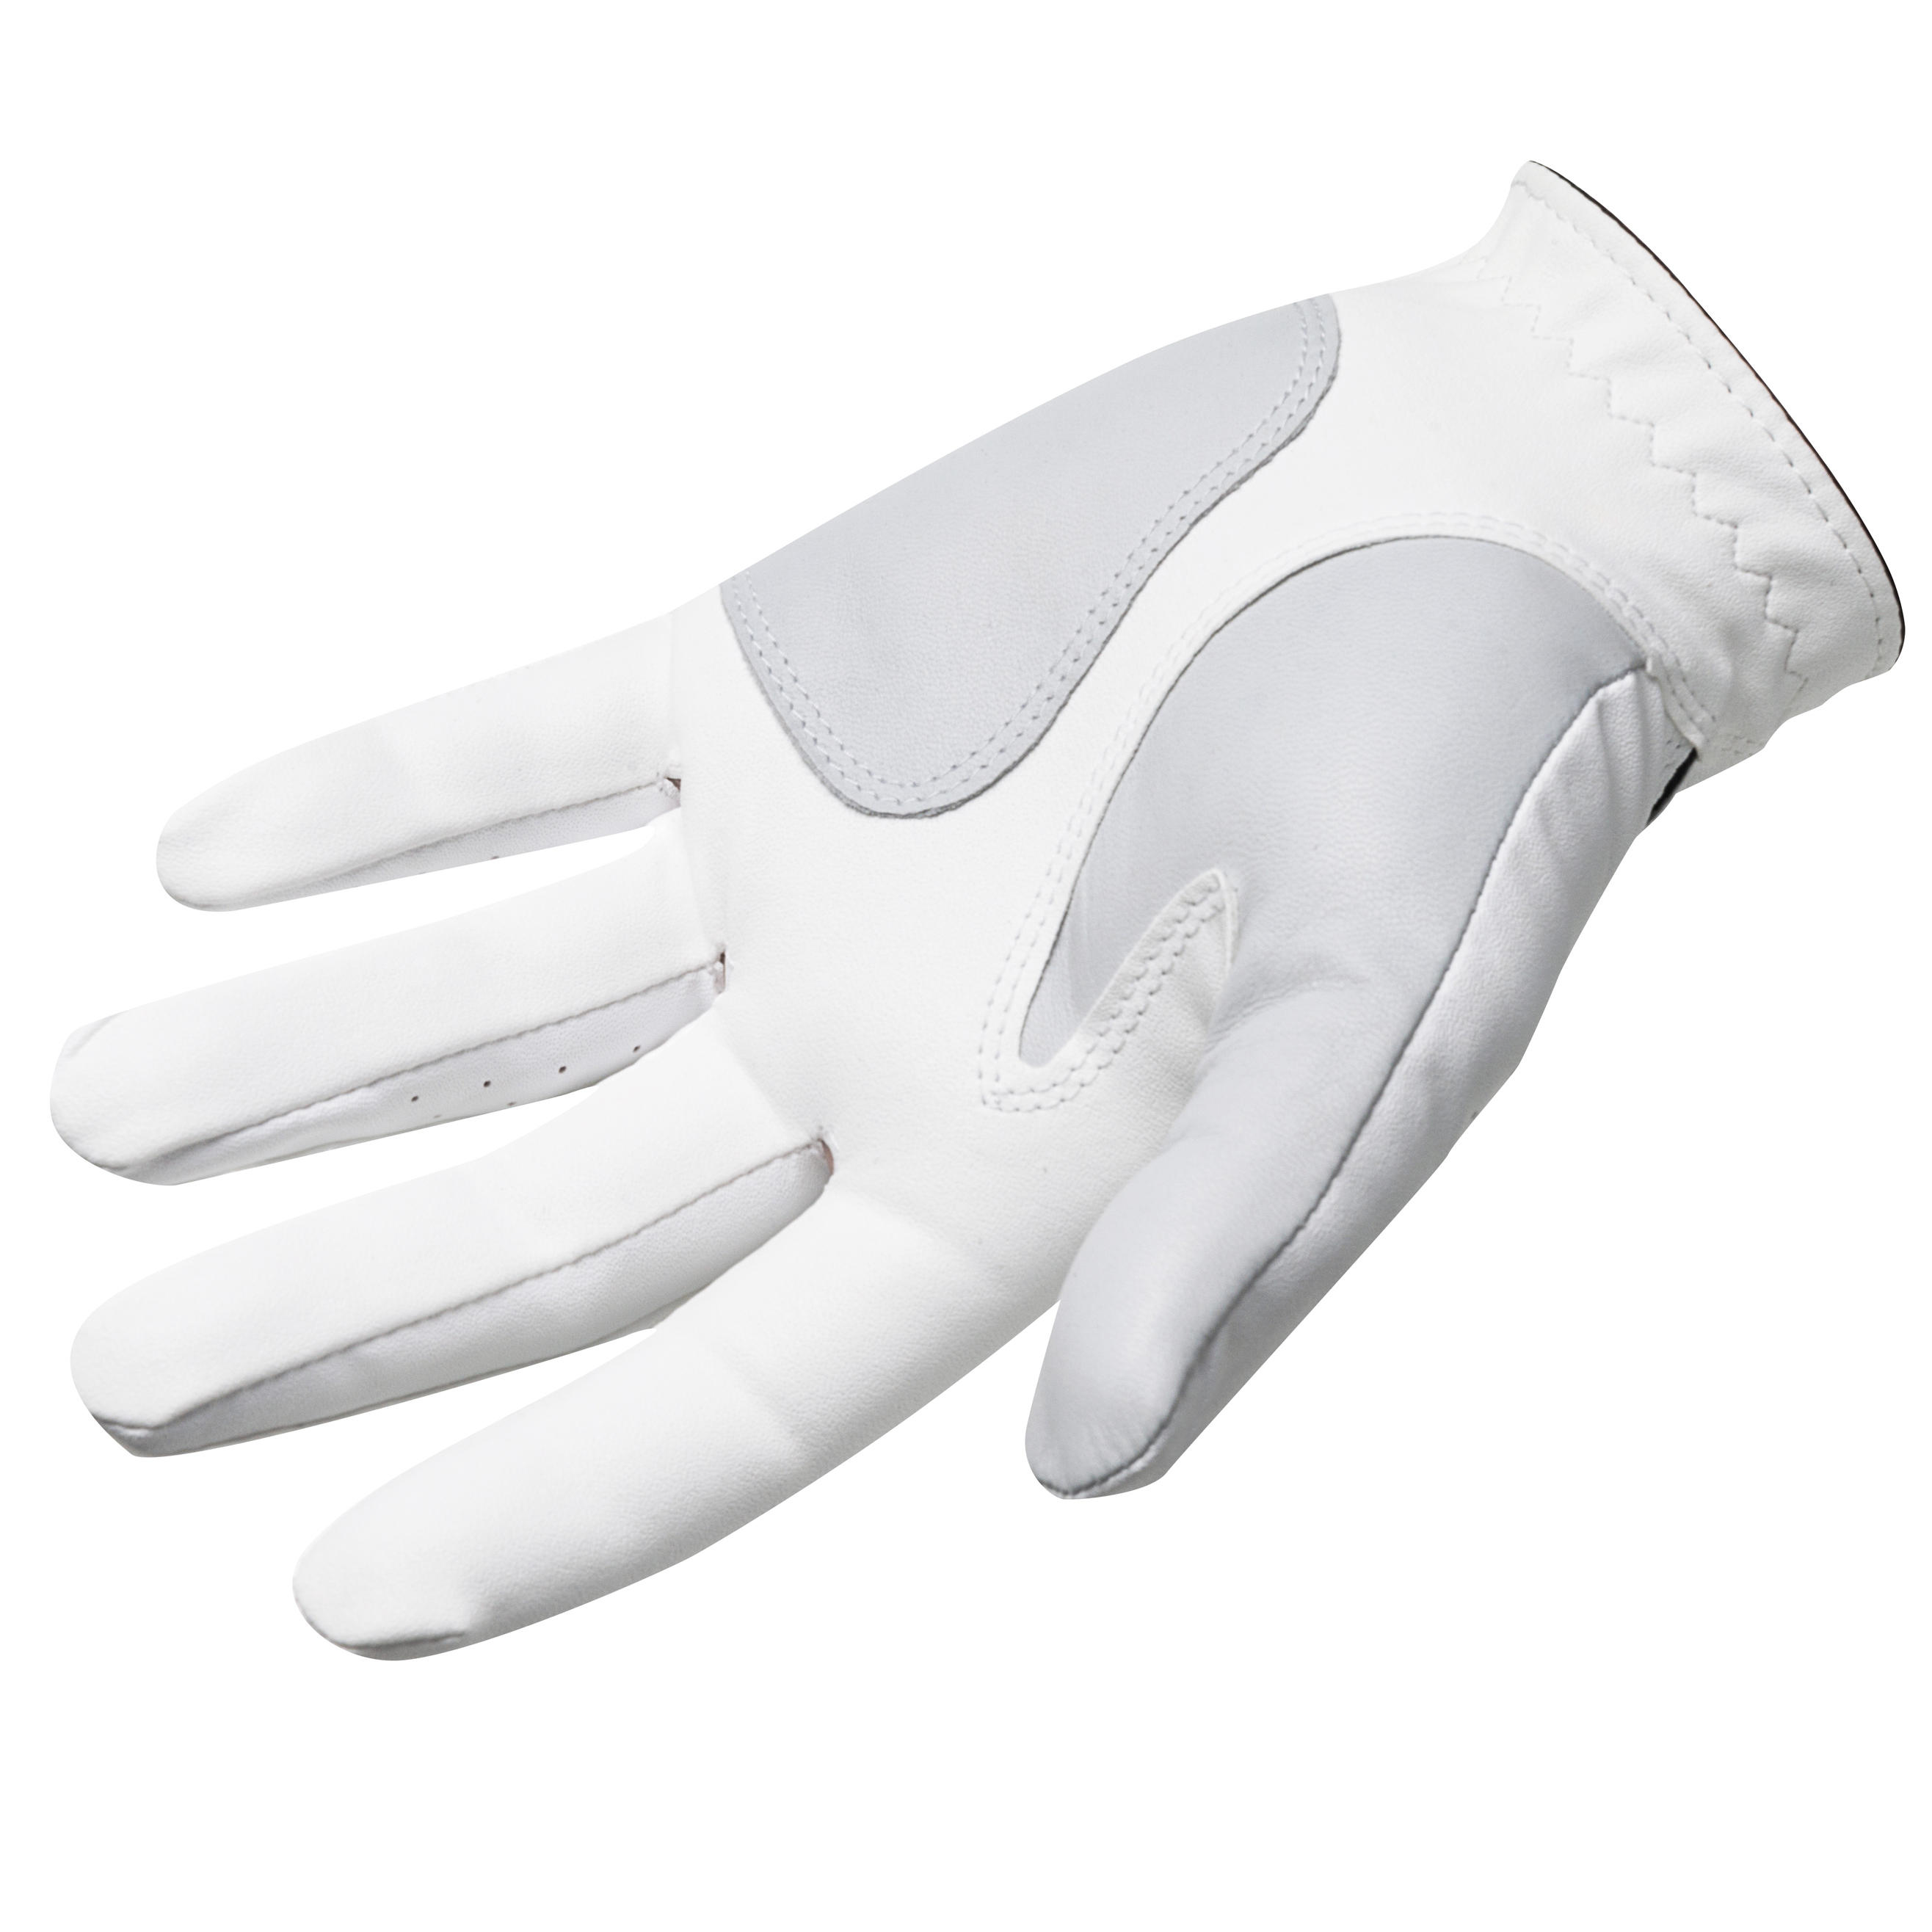 MEN'S GOLF GLOVE WEATHERSOF RIGHT HANDED - FOOTJOY WHITE 2/4